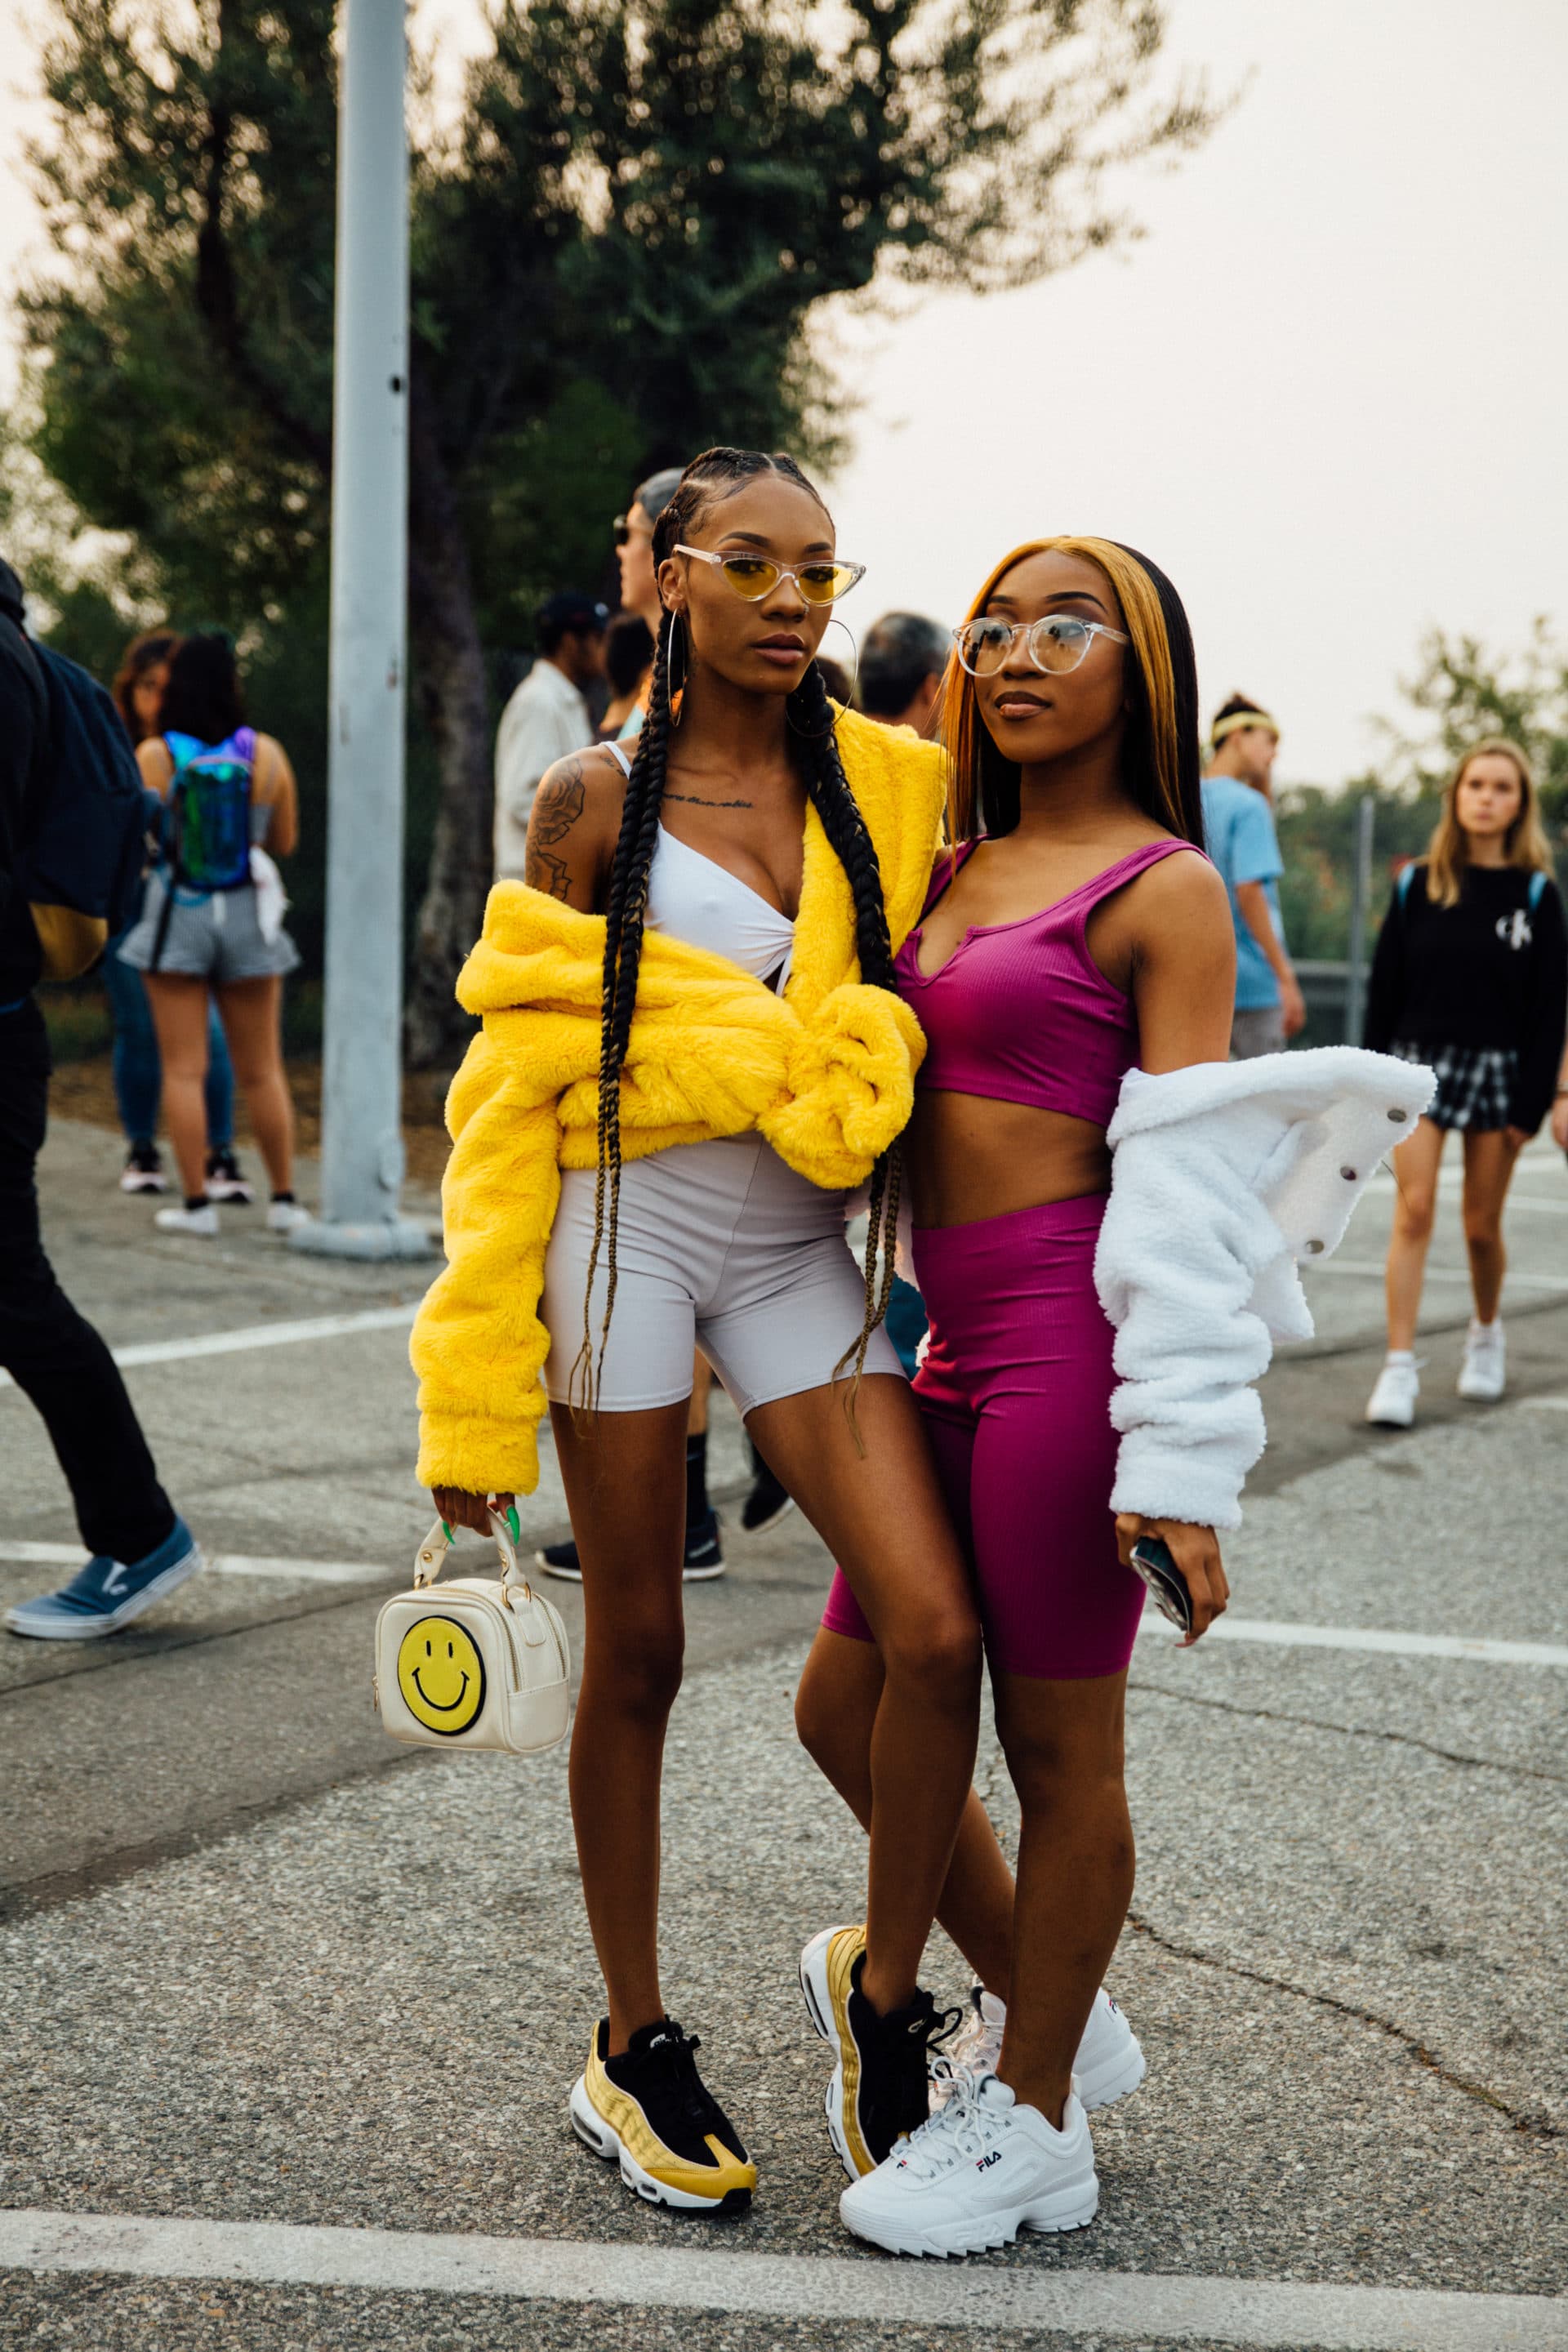 Talking style with some of Camp Flog Gnaw's best dressed